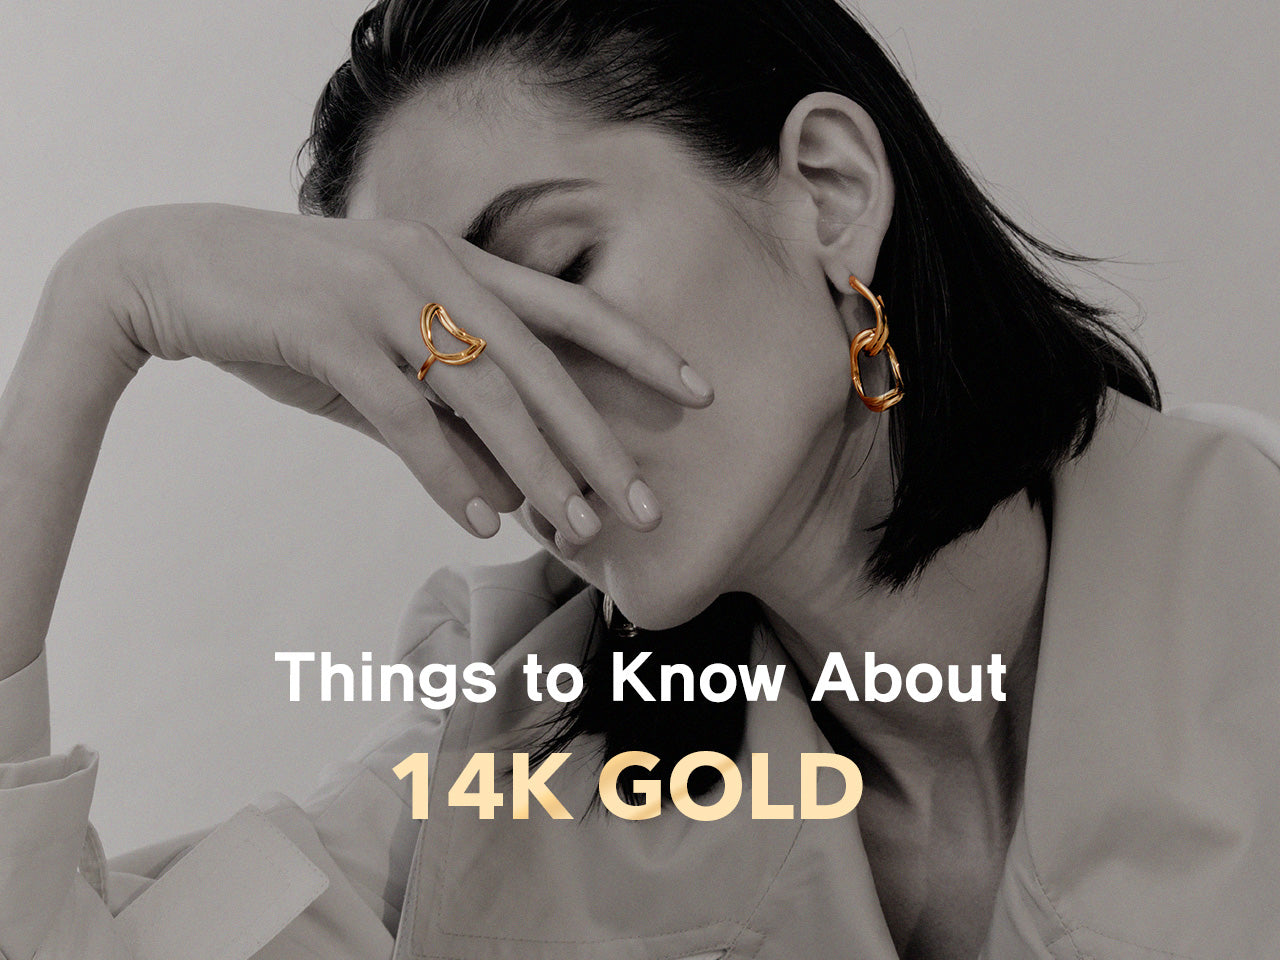 Things to Know About 14K Gold